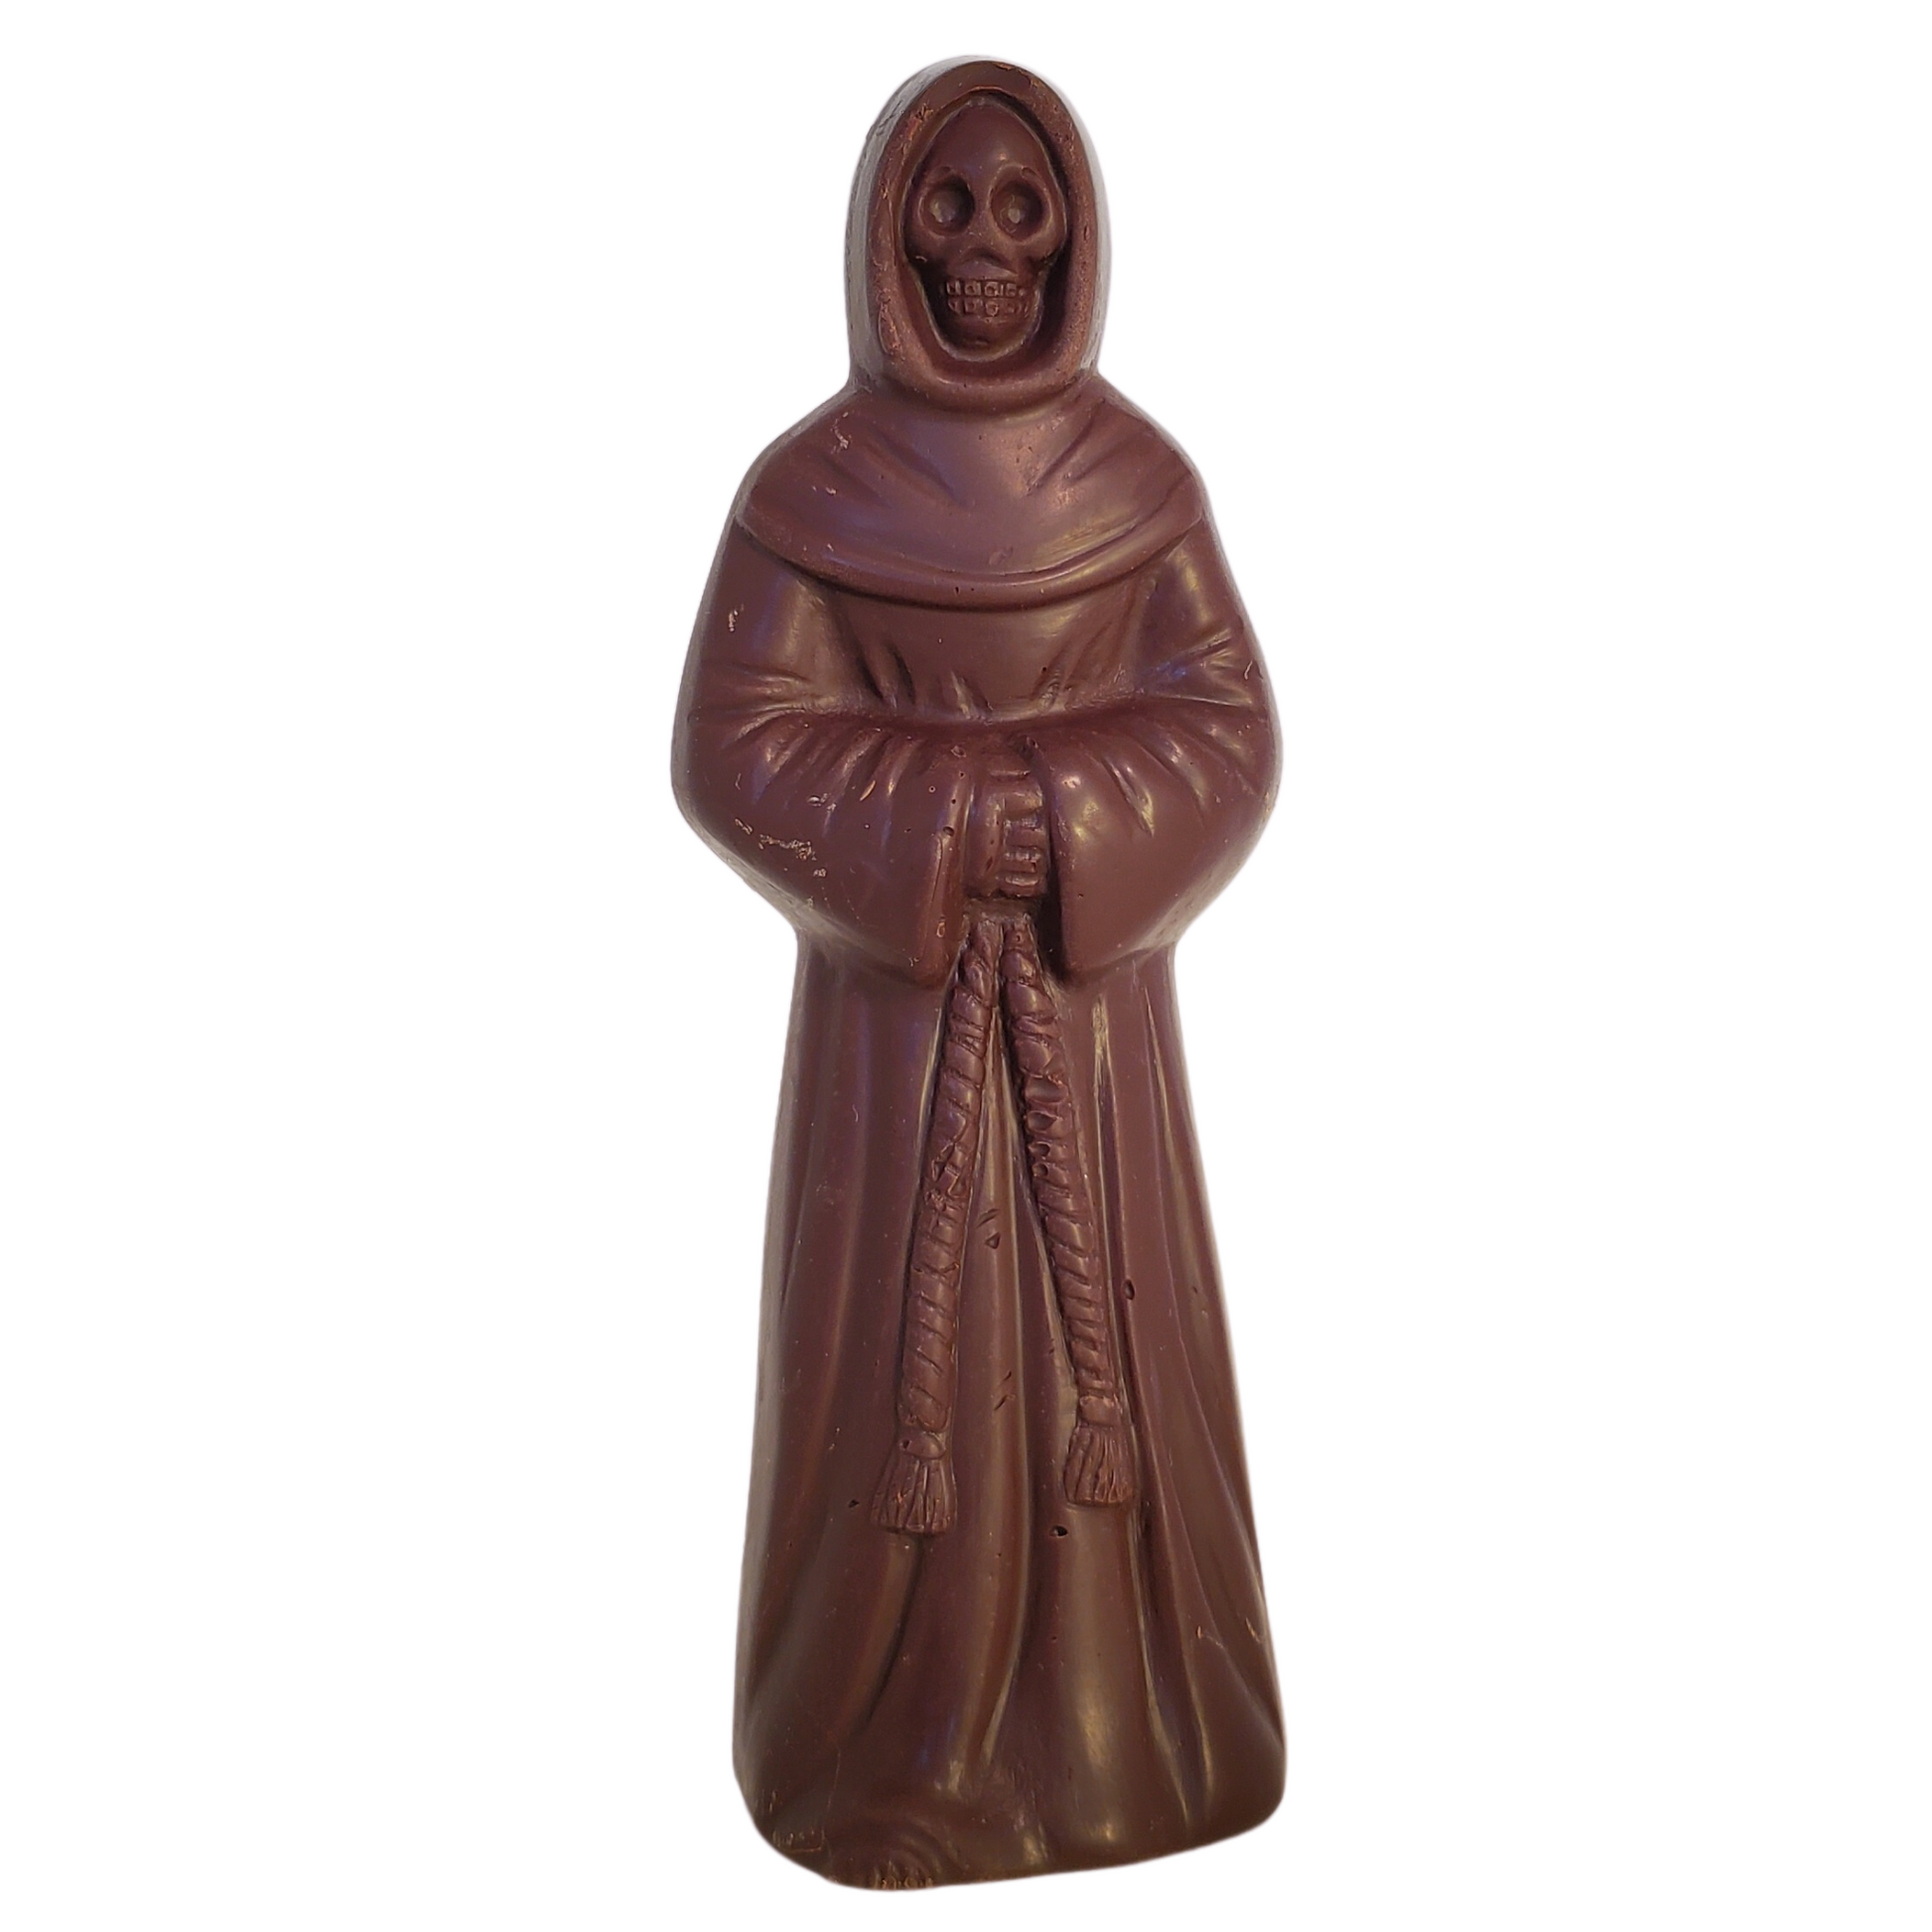 Dark chocolate figure of the Grim Reaper with a skull face and long robe, holding a rope..